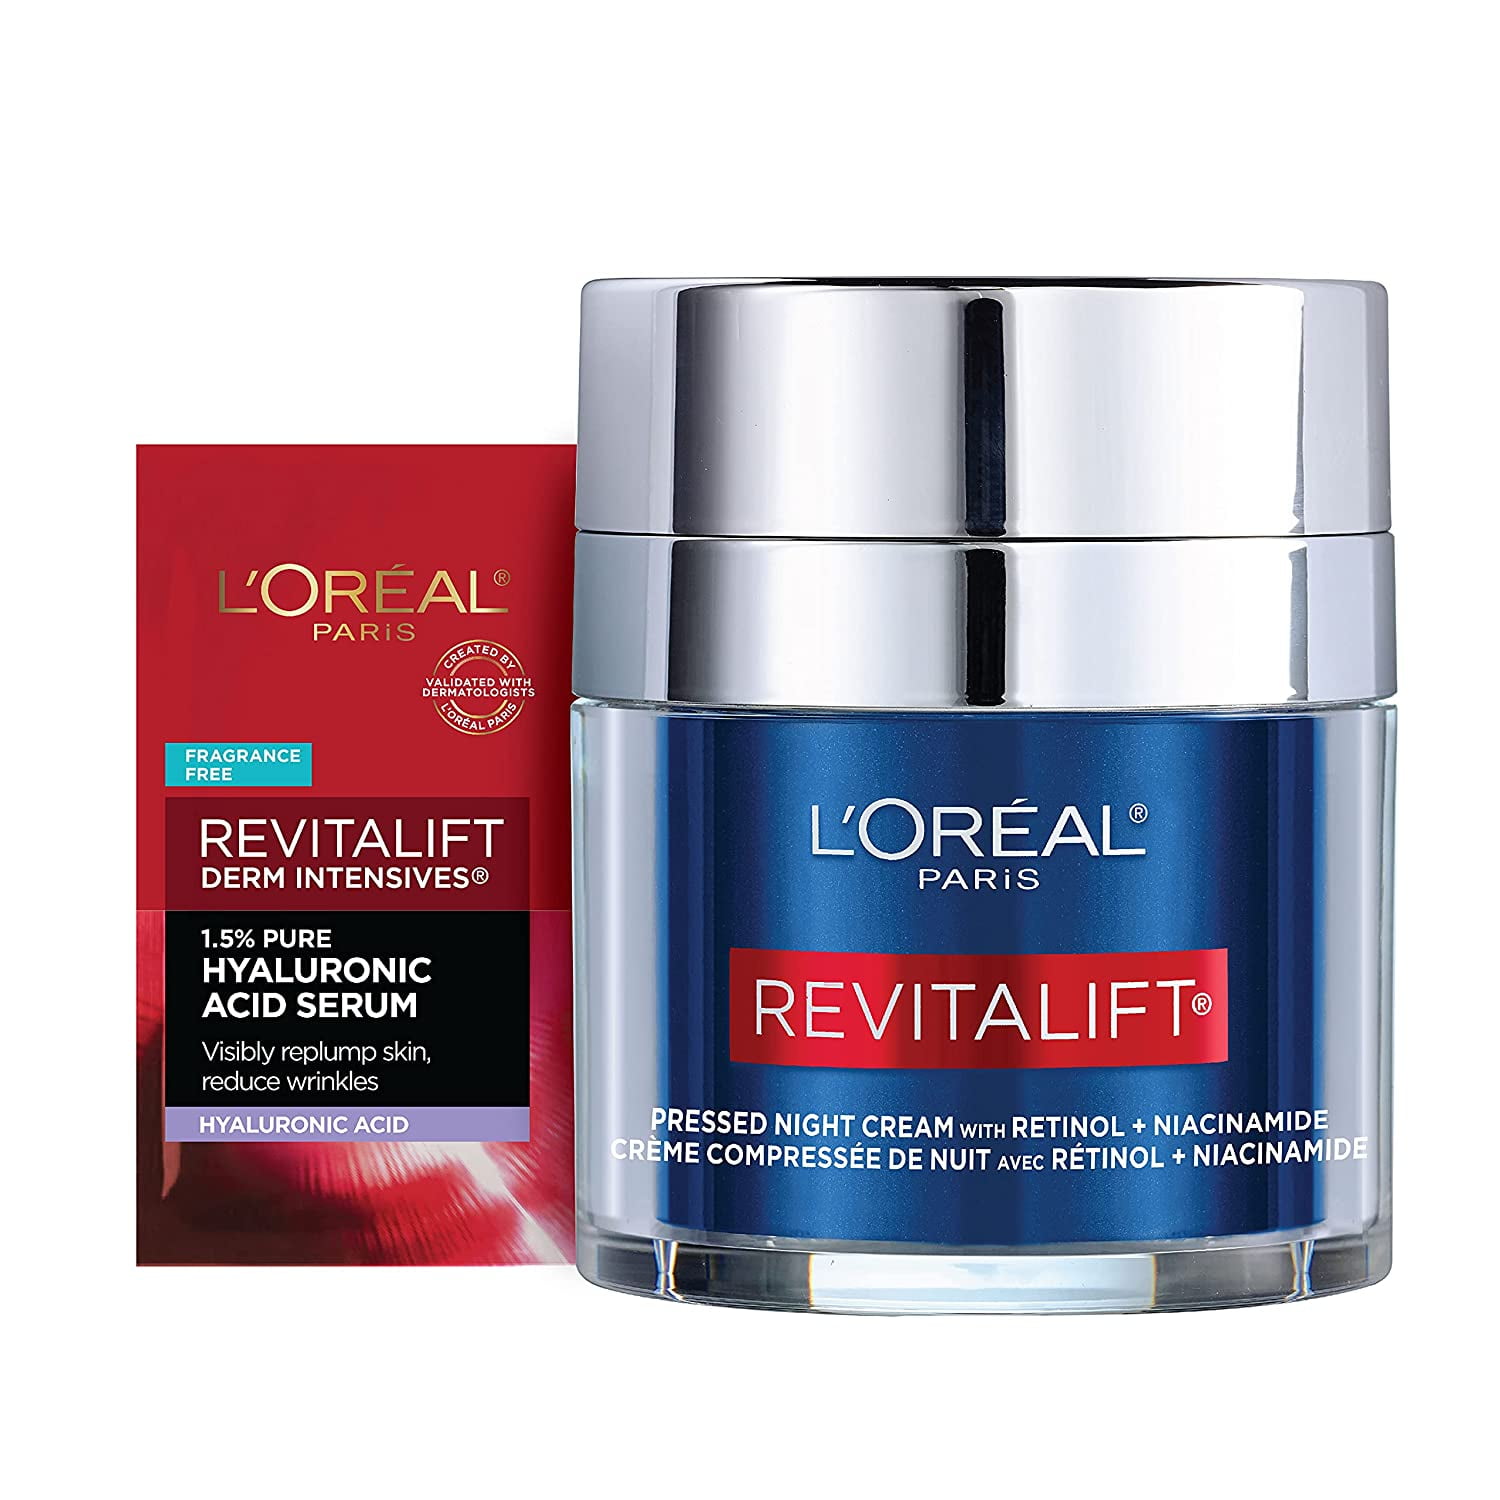 L'Oreal Paris Revitalift Pressed Night Cream with Retinol, Niacinamide, Visibly Reduce Wrinkles, Hydrate for Face, Under Neck, Chest, tested + Hyaluronic Acid Serum Sample, kit, - Walmart.com